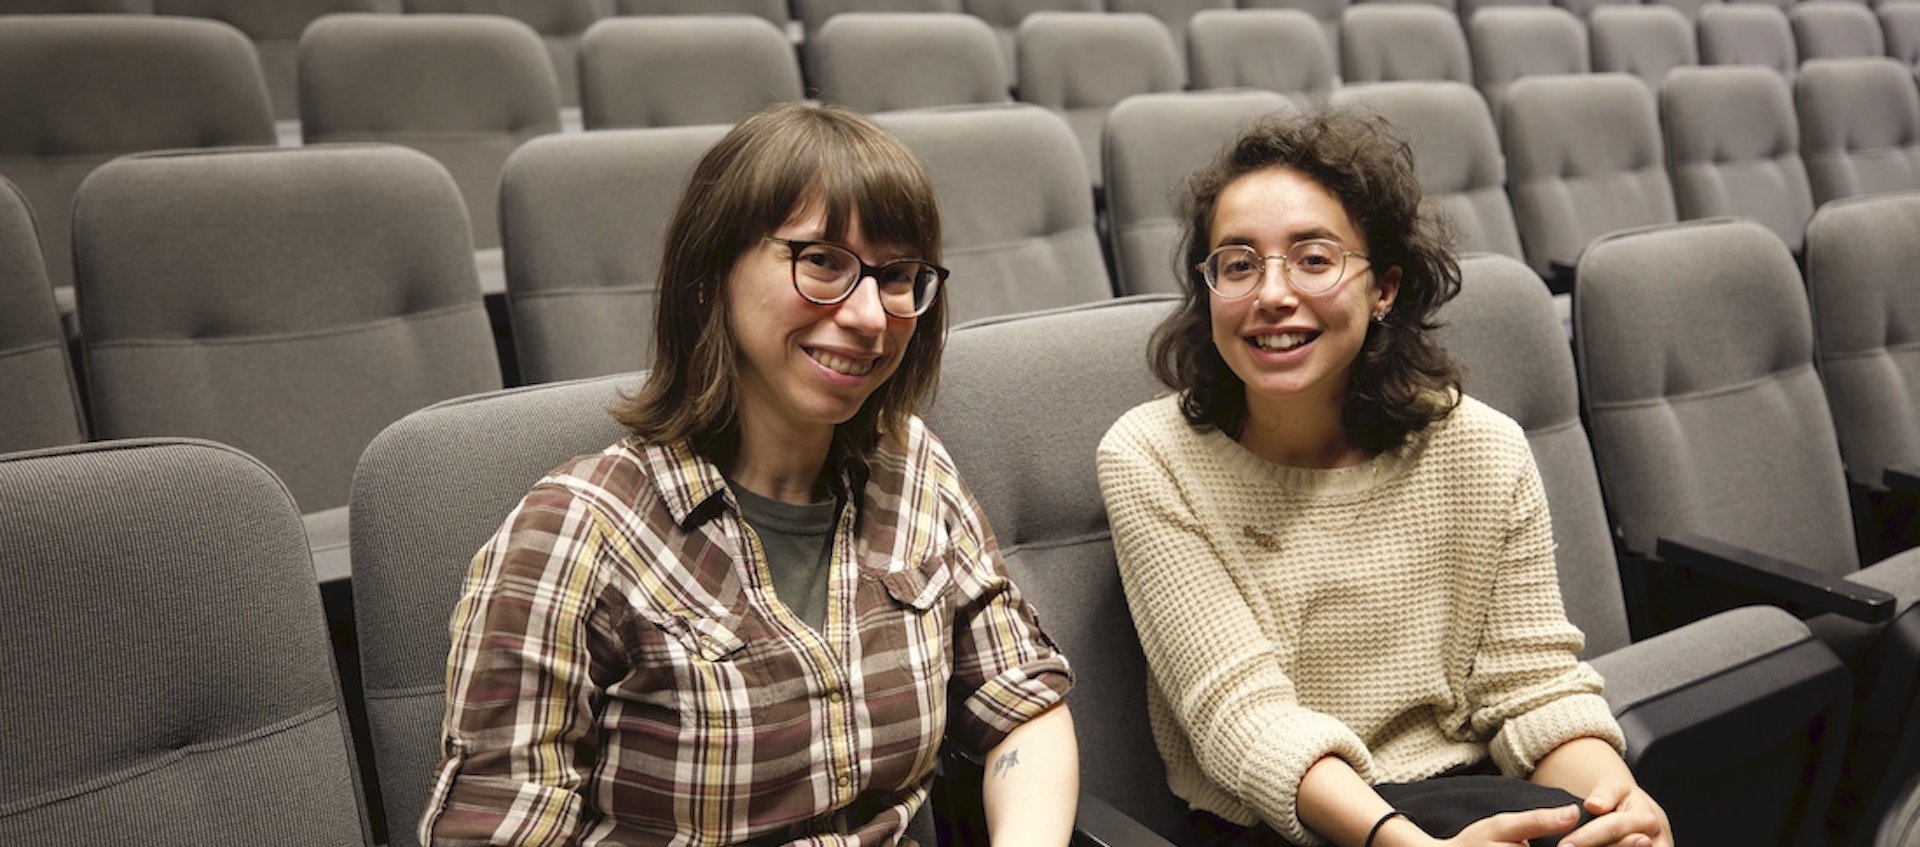 Wexner Center for the Arts projectionist Rachael Barbash and Film/Video program assistant Layla Muchnik-Benali sitting in an otherwise empty screening room